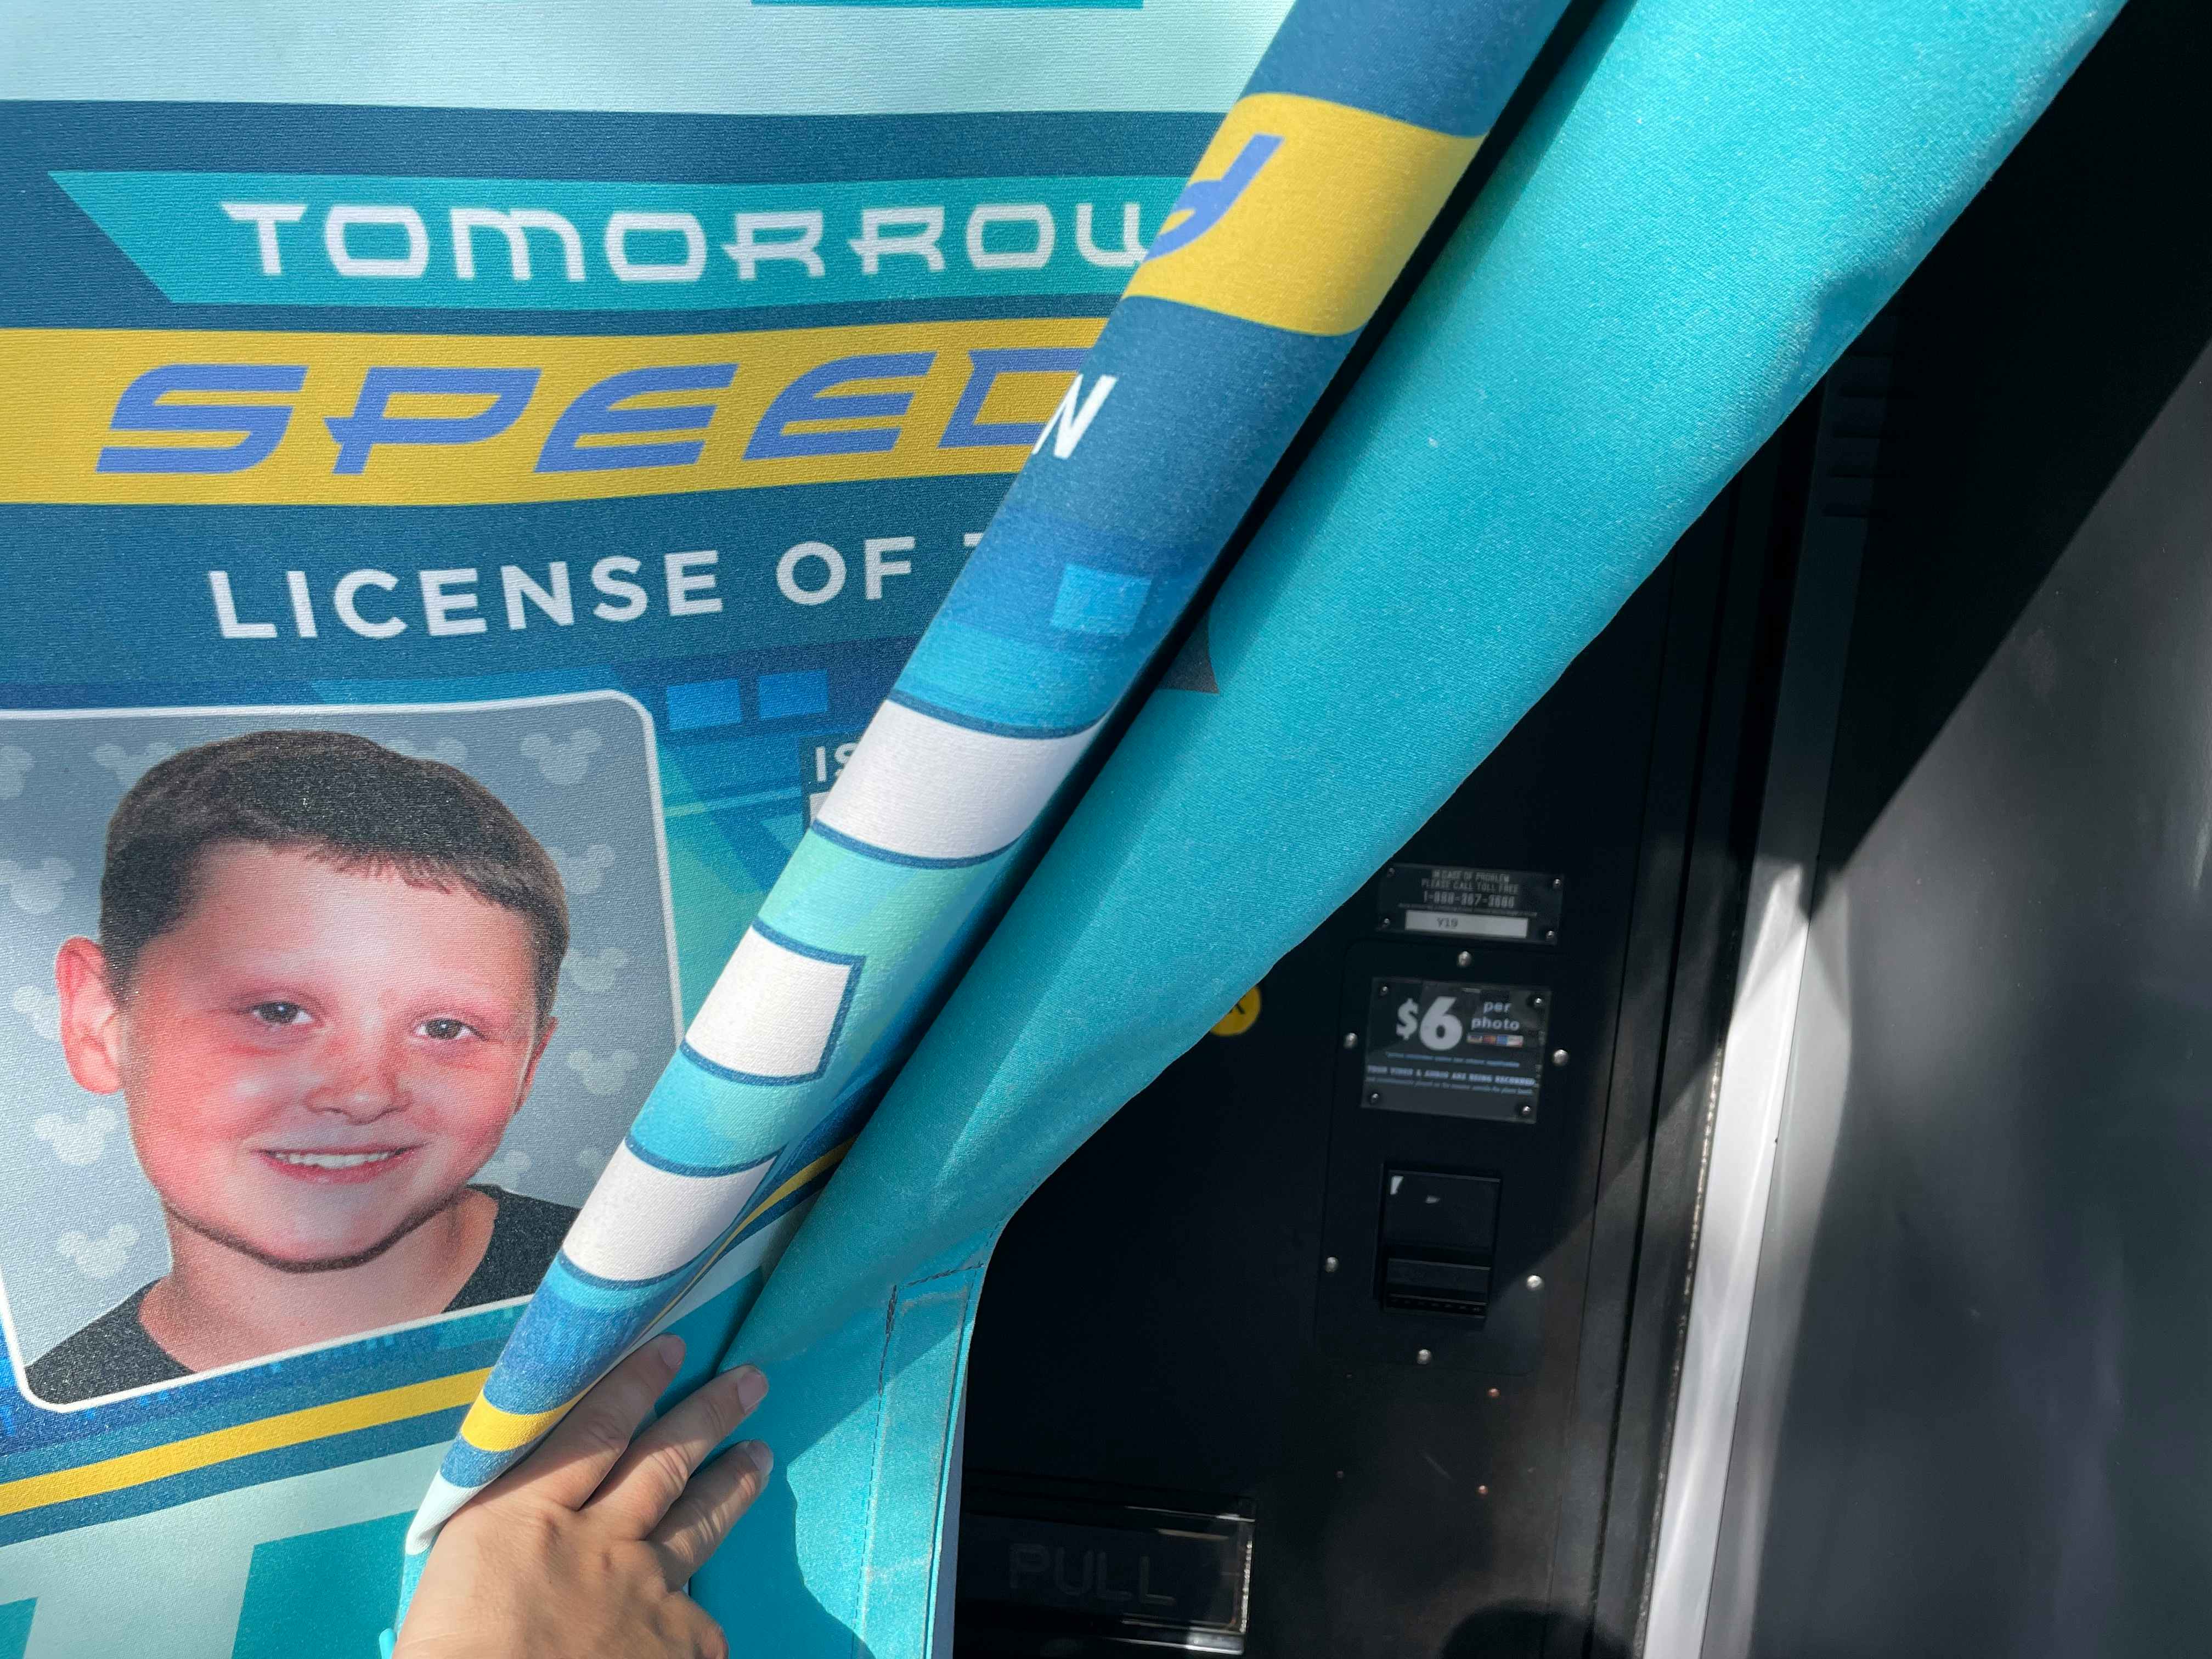 A person's hand opening the curtain to the Tomorrowland Speedway driver's license booth, revealing the $6 price tag.